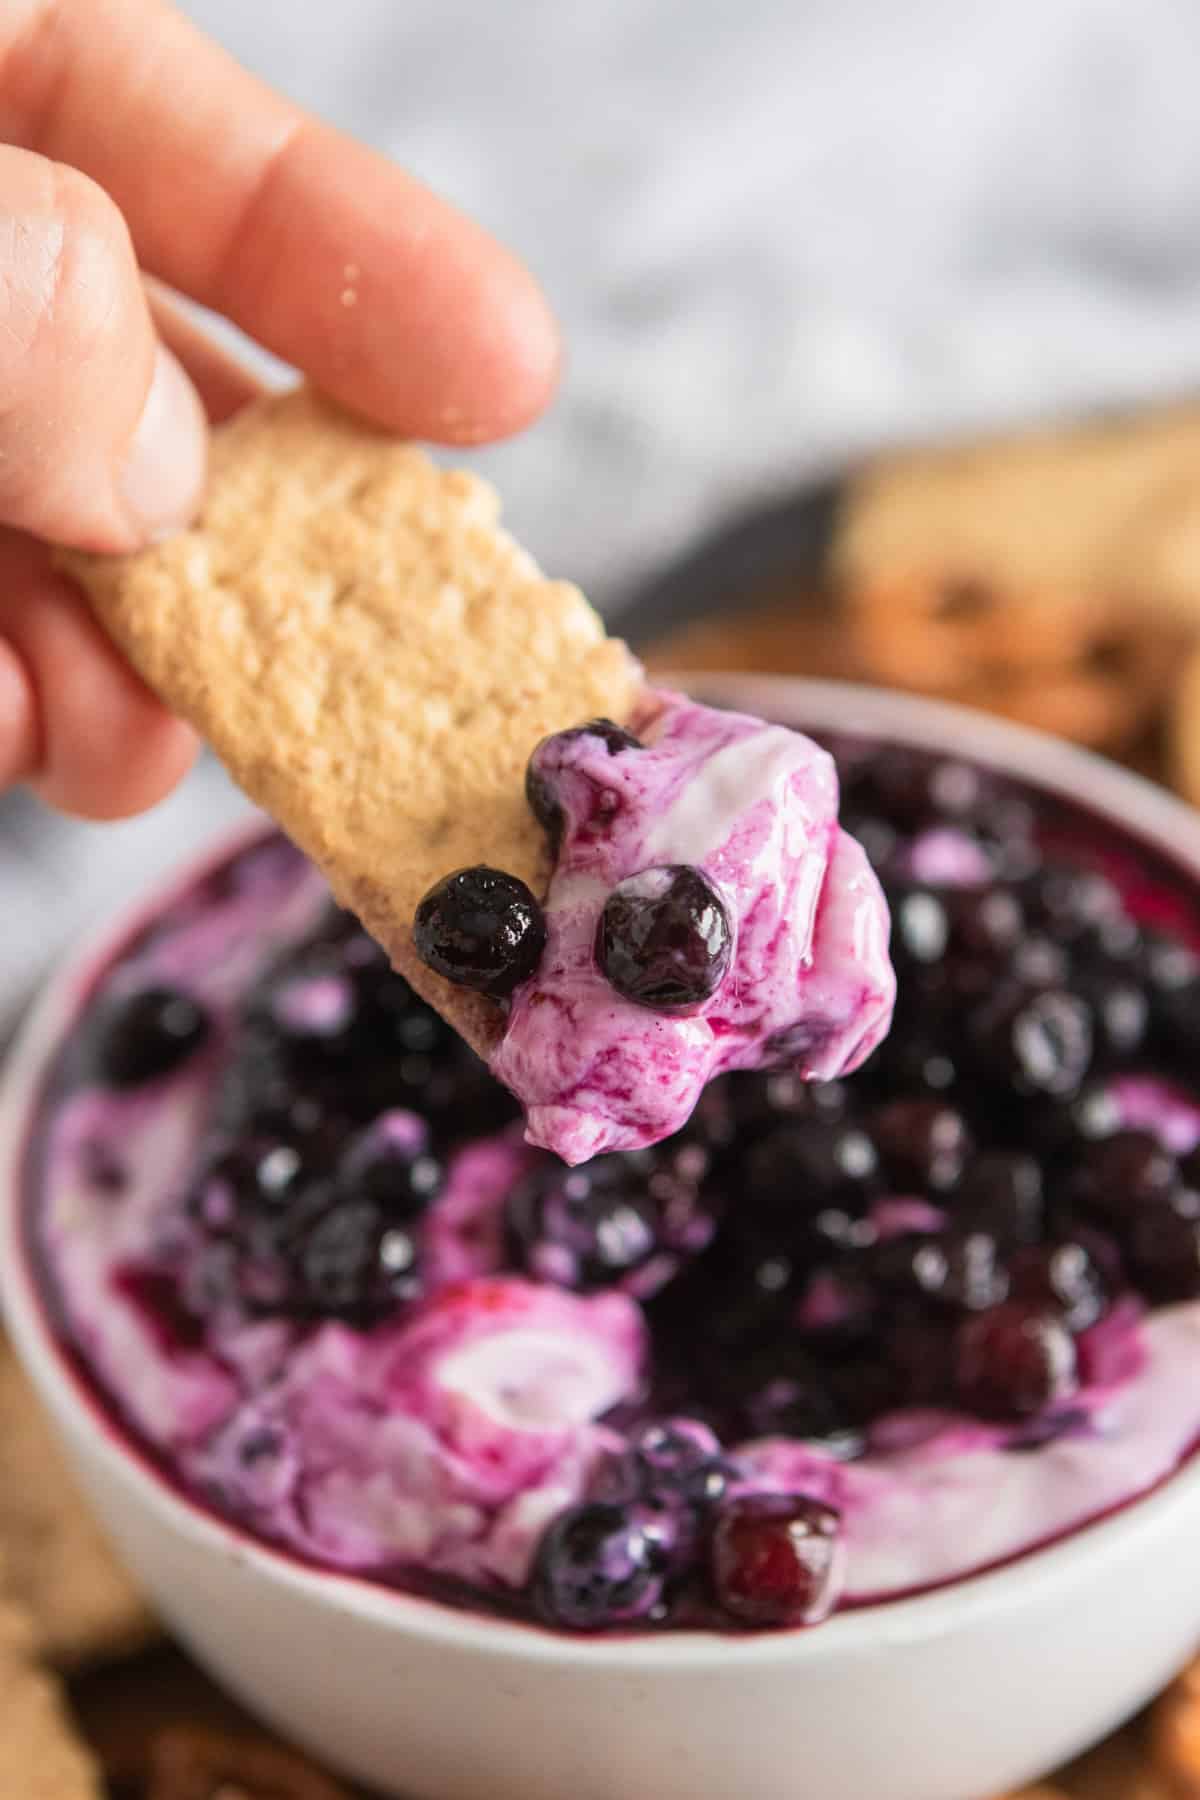 Graham cracker dipped in blueberry cheesecake dip.